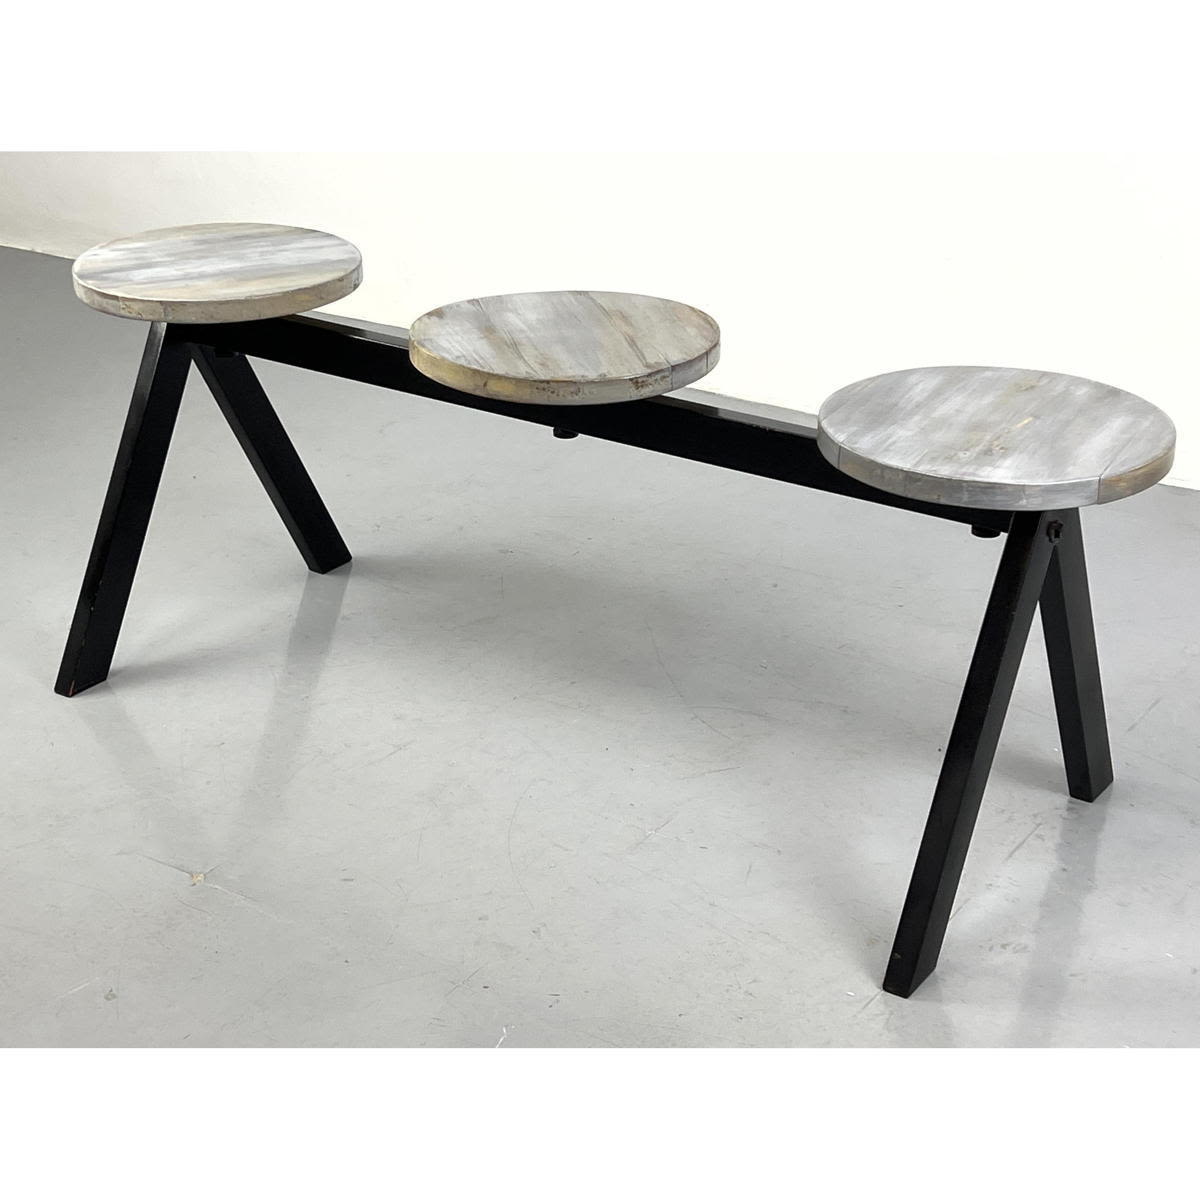 Contemporary 3 Seat Bench. 3 Wood